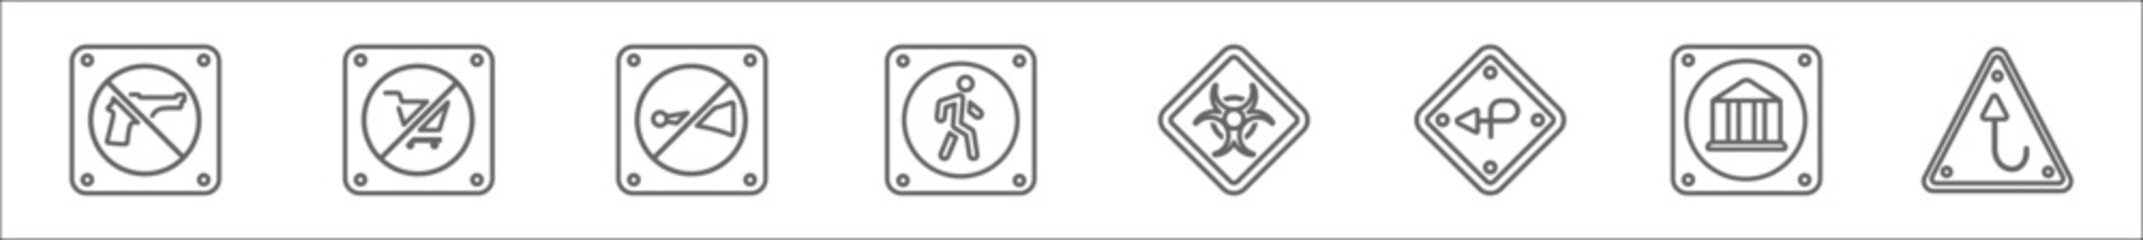 outline set of traffic signs line icons. linear vector icons such as no weapons, no shopping cart, horn, pedestrian, biological hazard, degree curve road, museum, highway